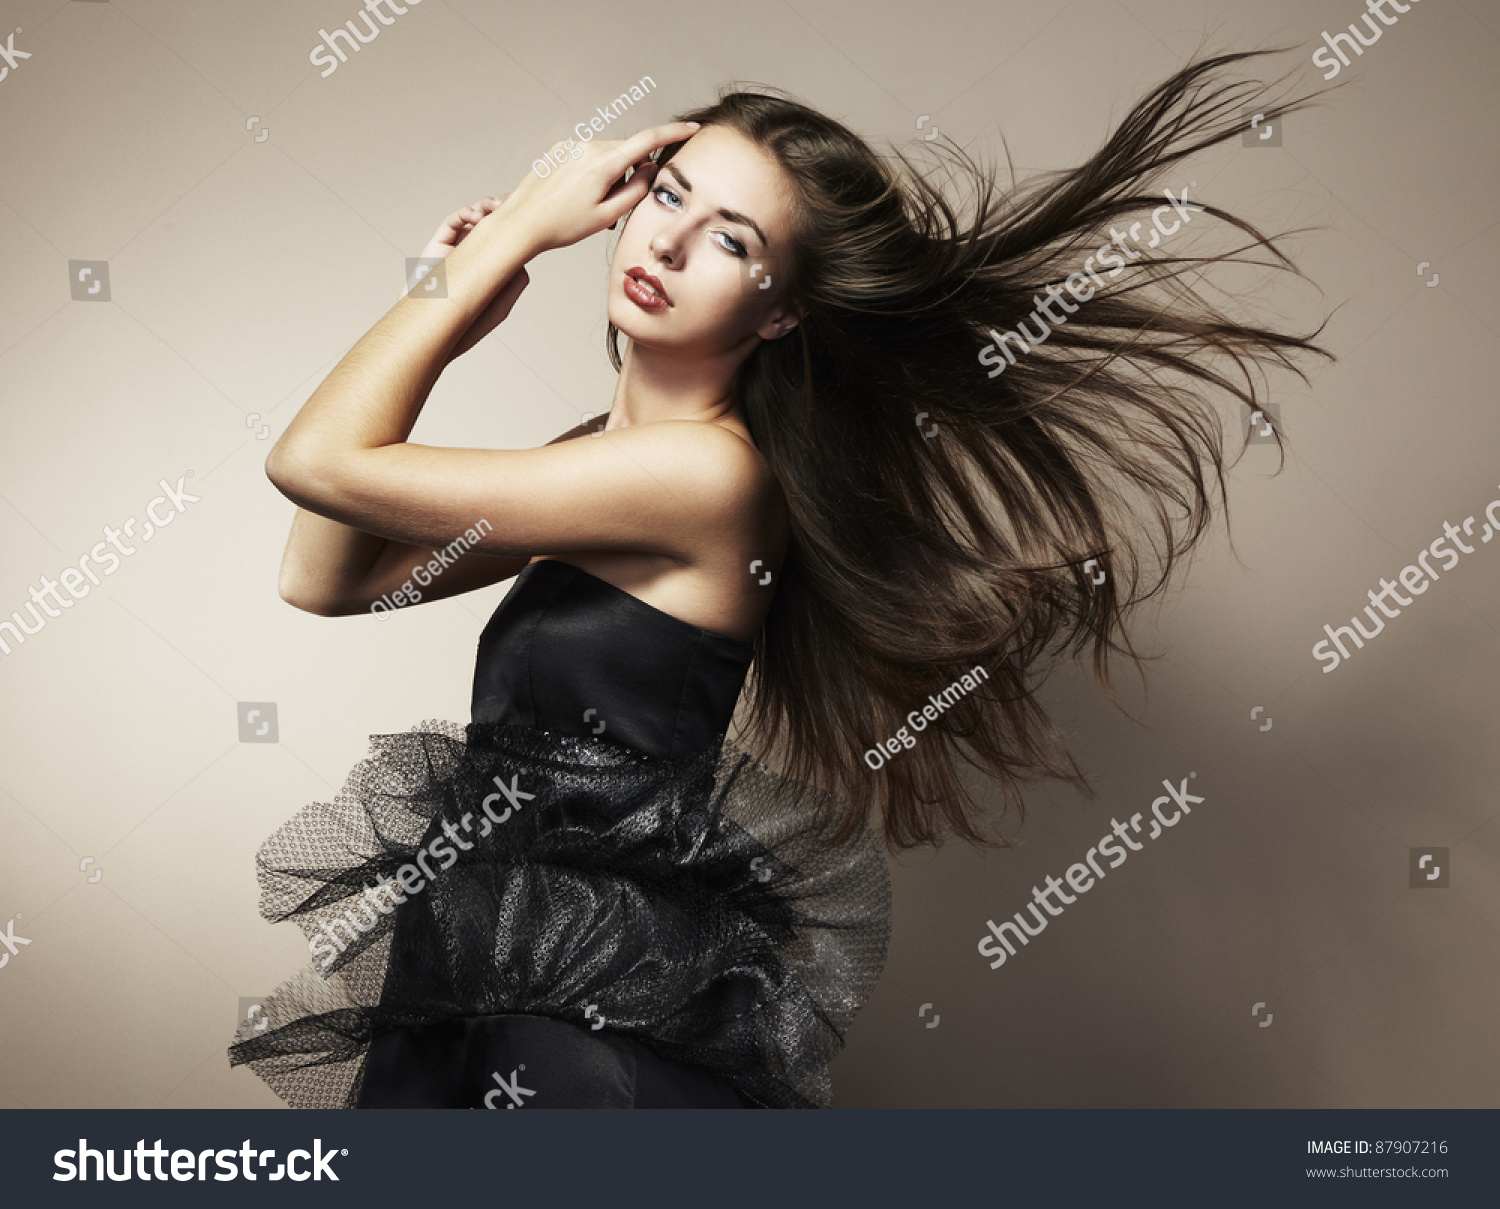 Portrait Of Young Dancing Woman With Long Flowing Hair. Fashion Photo ...